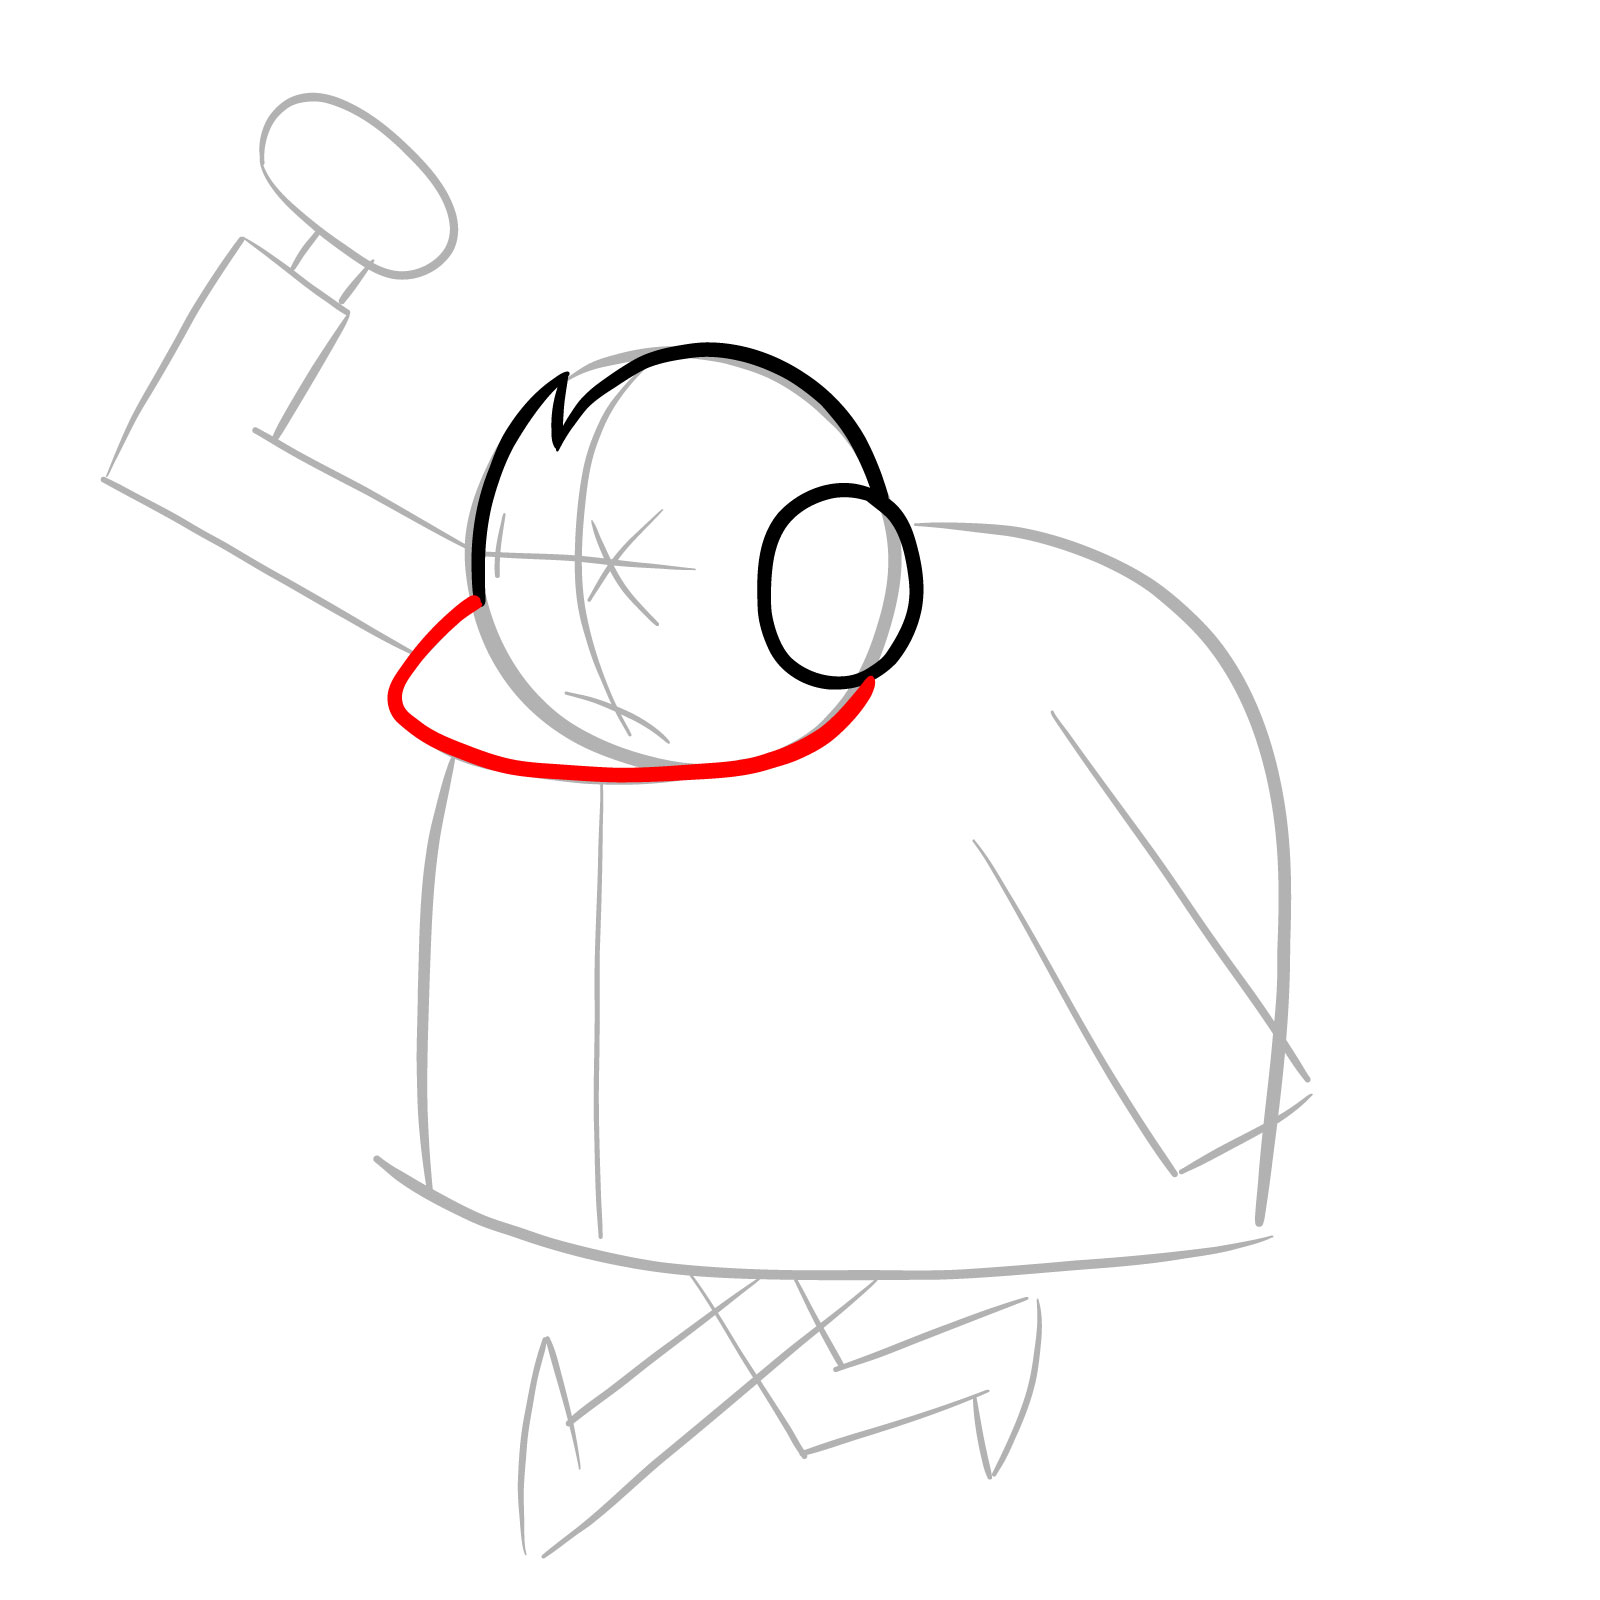 How to draw Lord Boxman from OK K.O.! - step 05